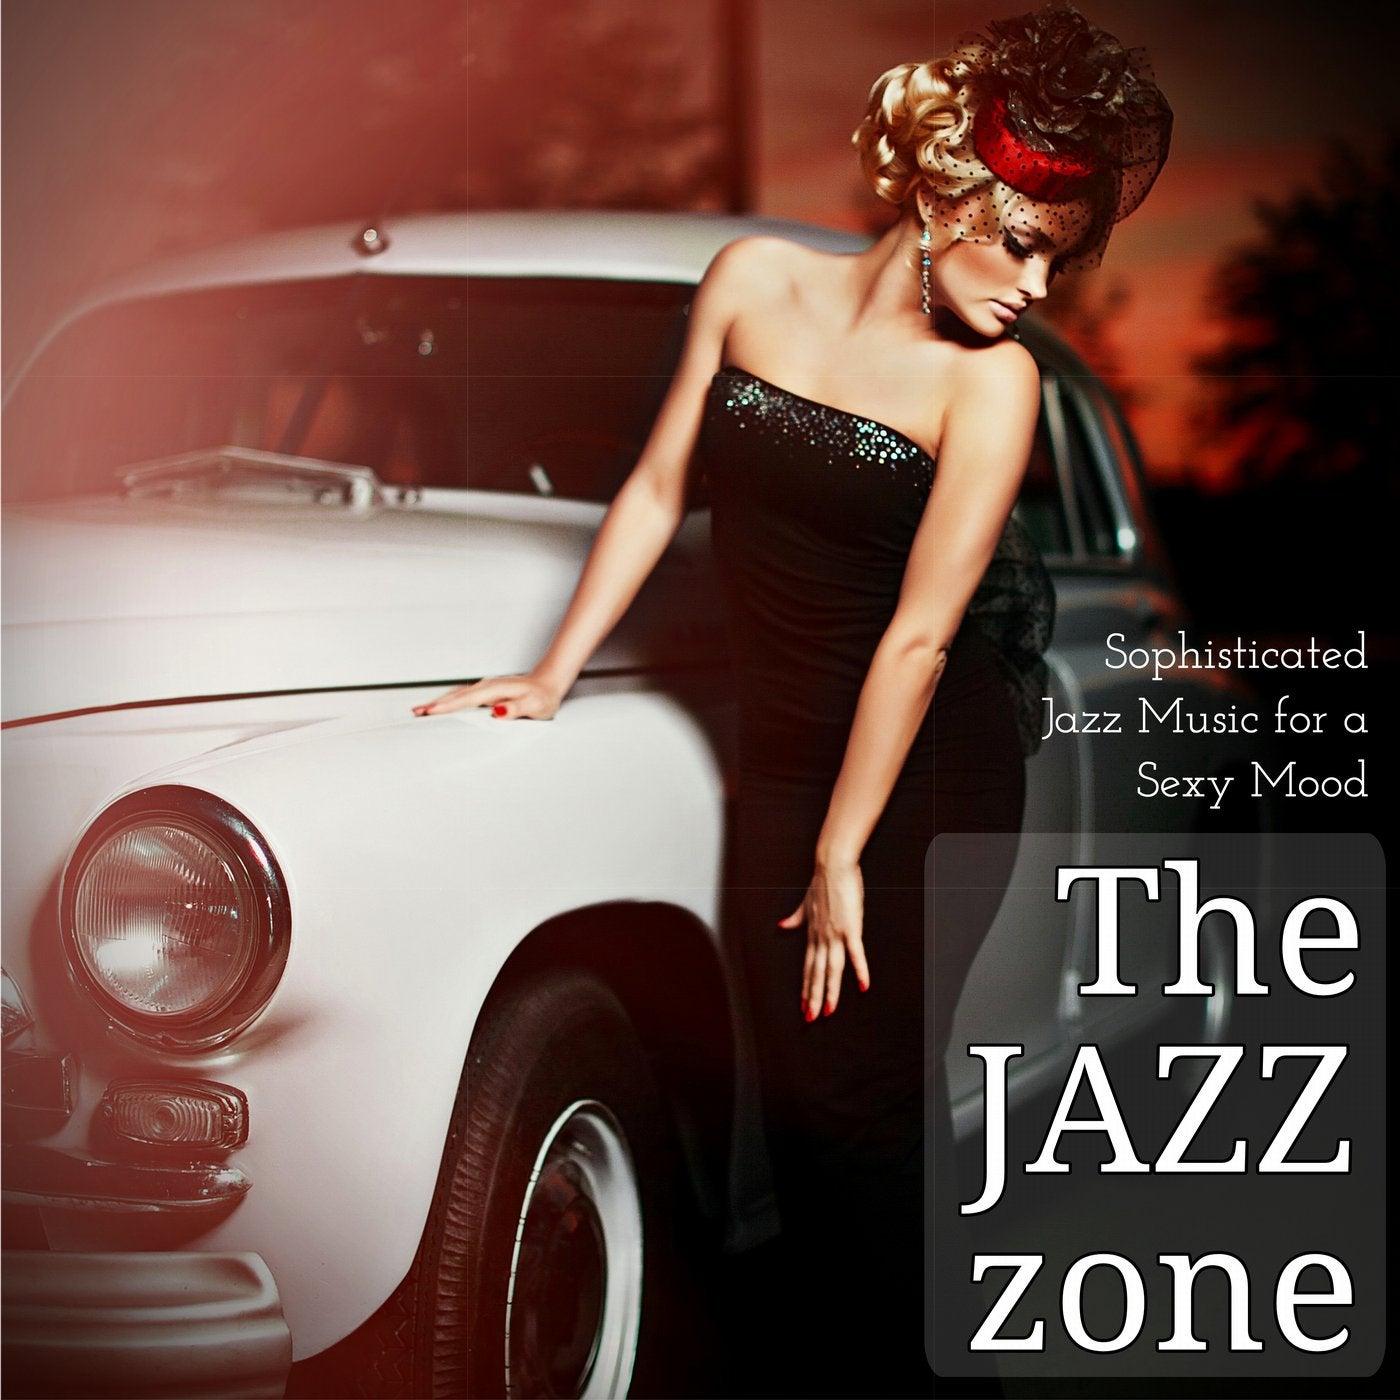 The Jazz Zone Sophisticated Jazz Music for a Sexy Mood